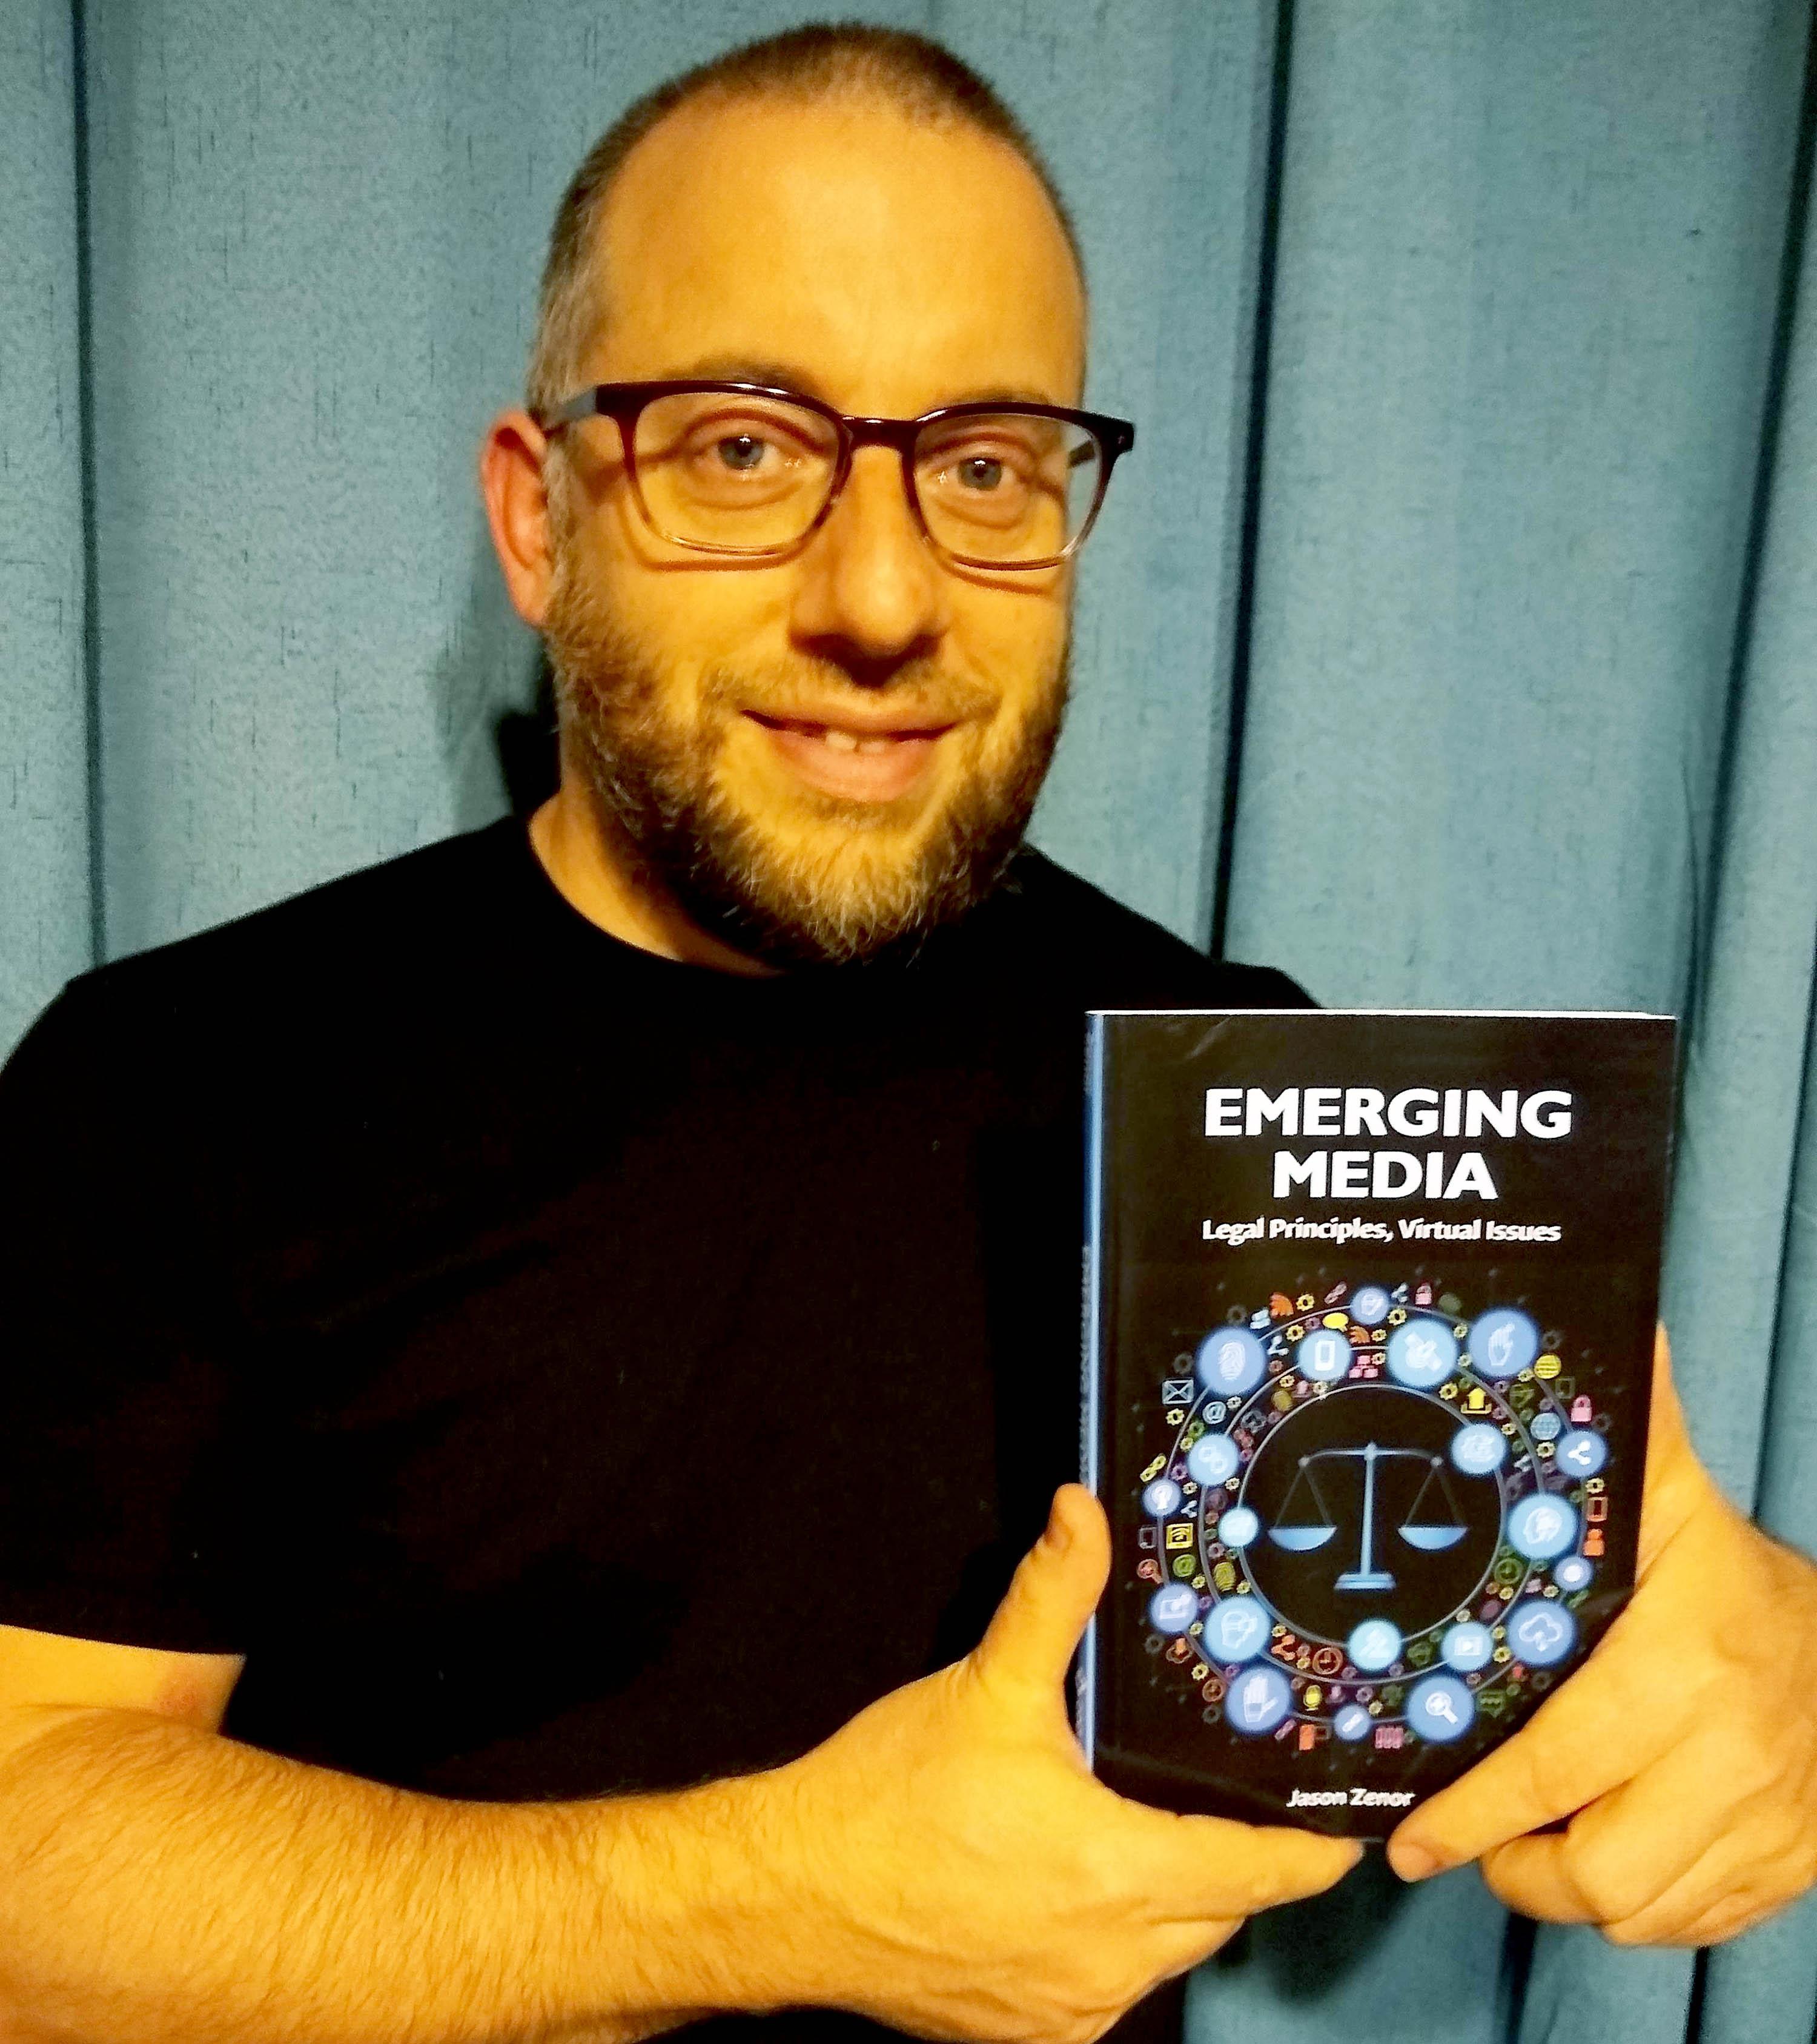 Jason Zenor with book about emerging issues in media law